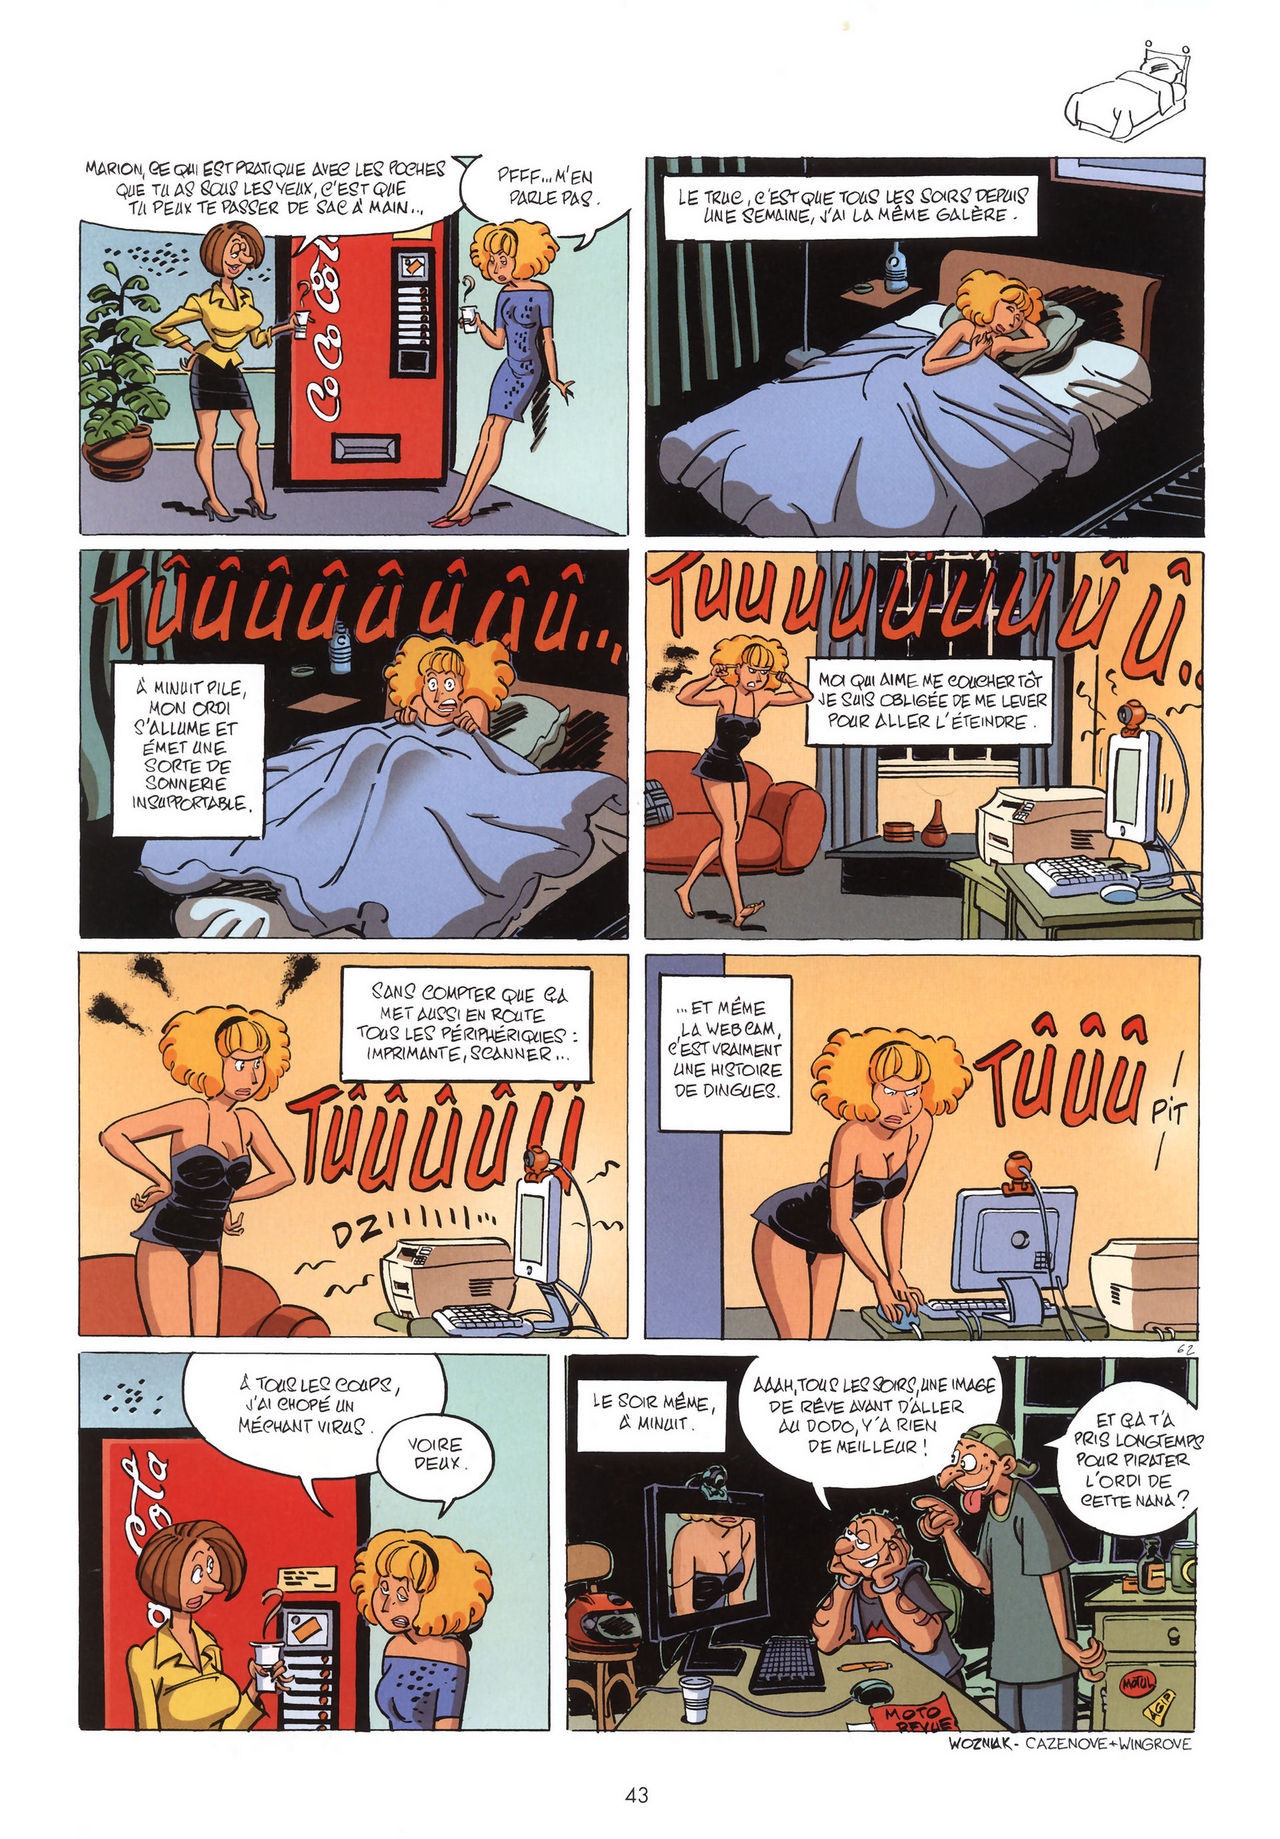 Plan Drague - Tome 02 - Franche Connexion [french] 43